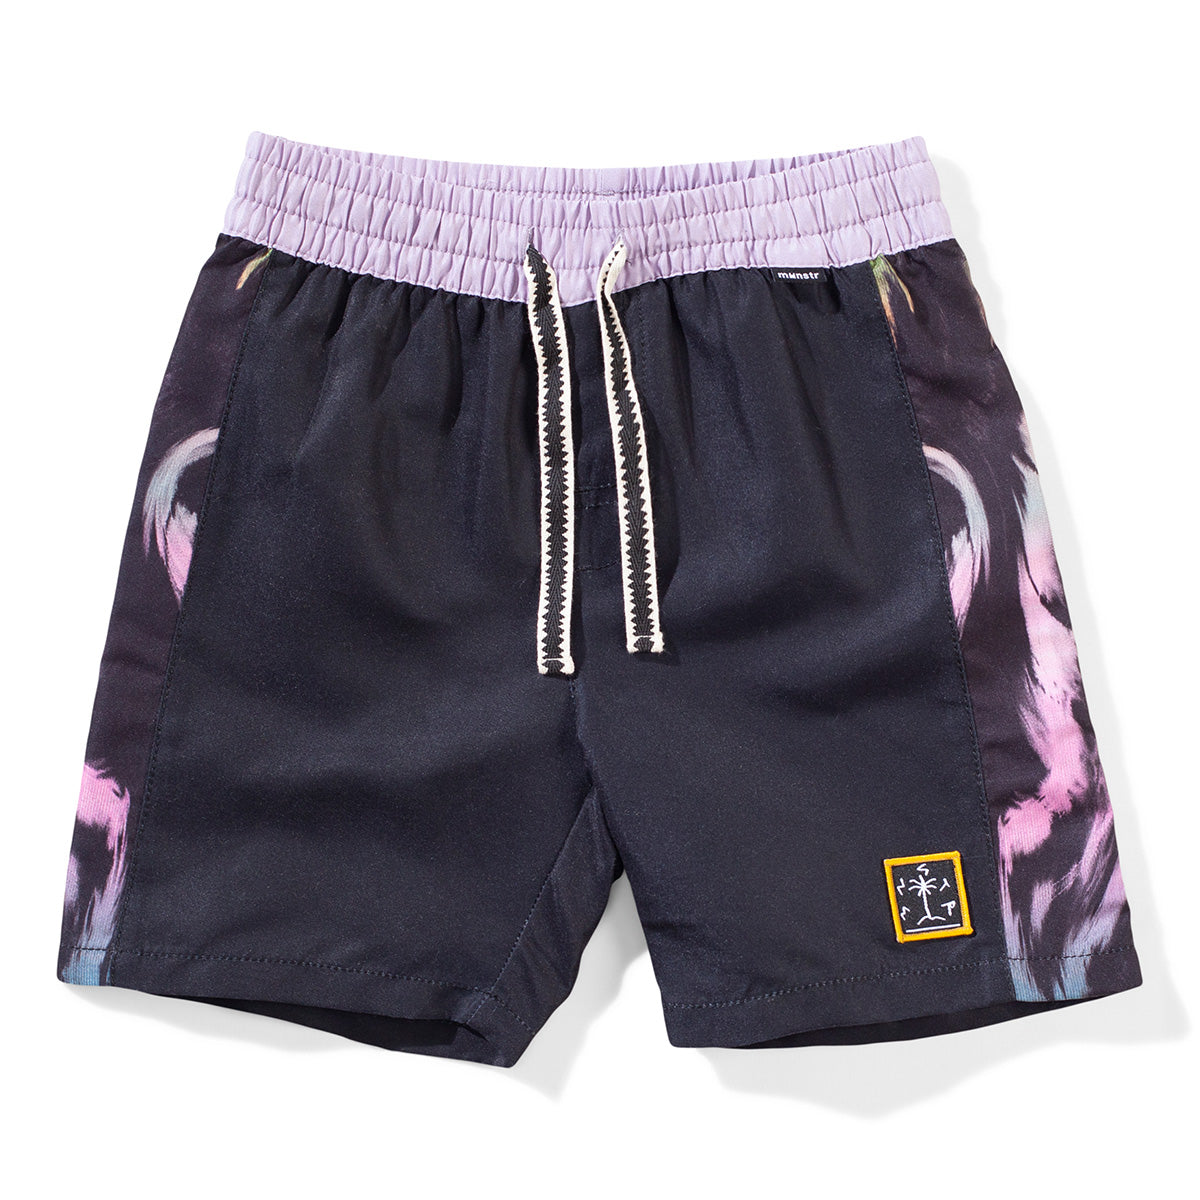 The Sideswirl Short from Munster. Embroidered patch in the front, Velcro pocket(s), Elasticated waist, Adjustable.